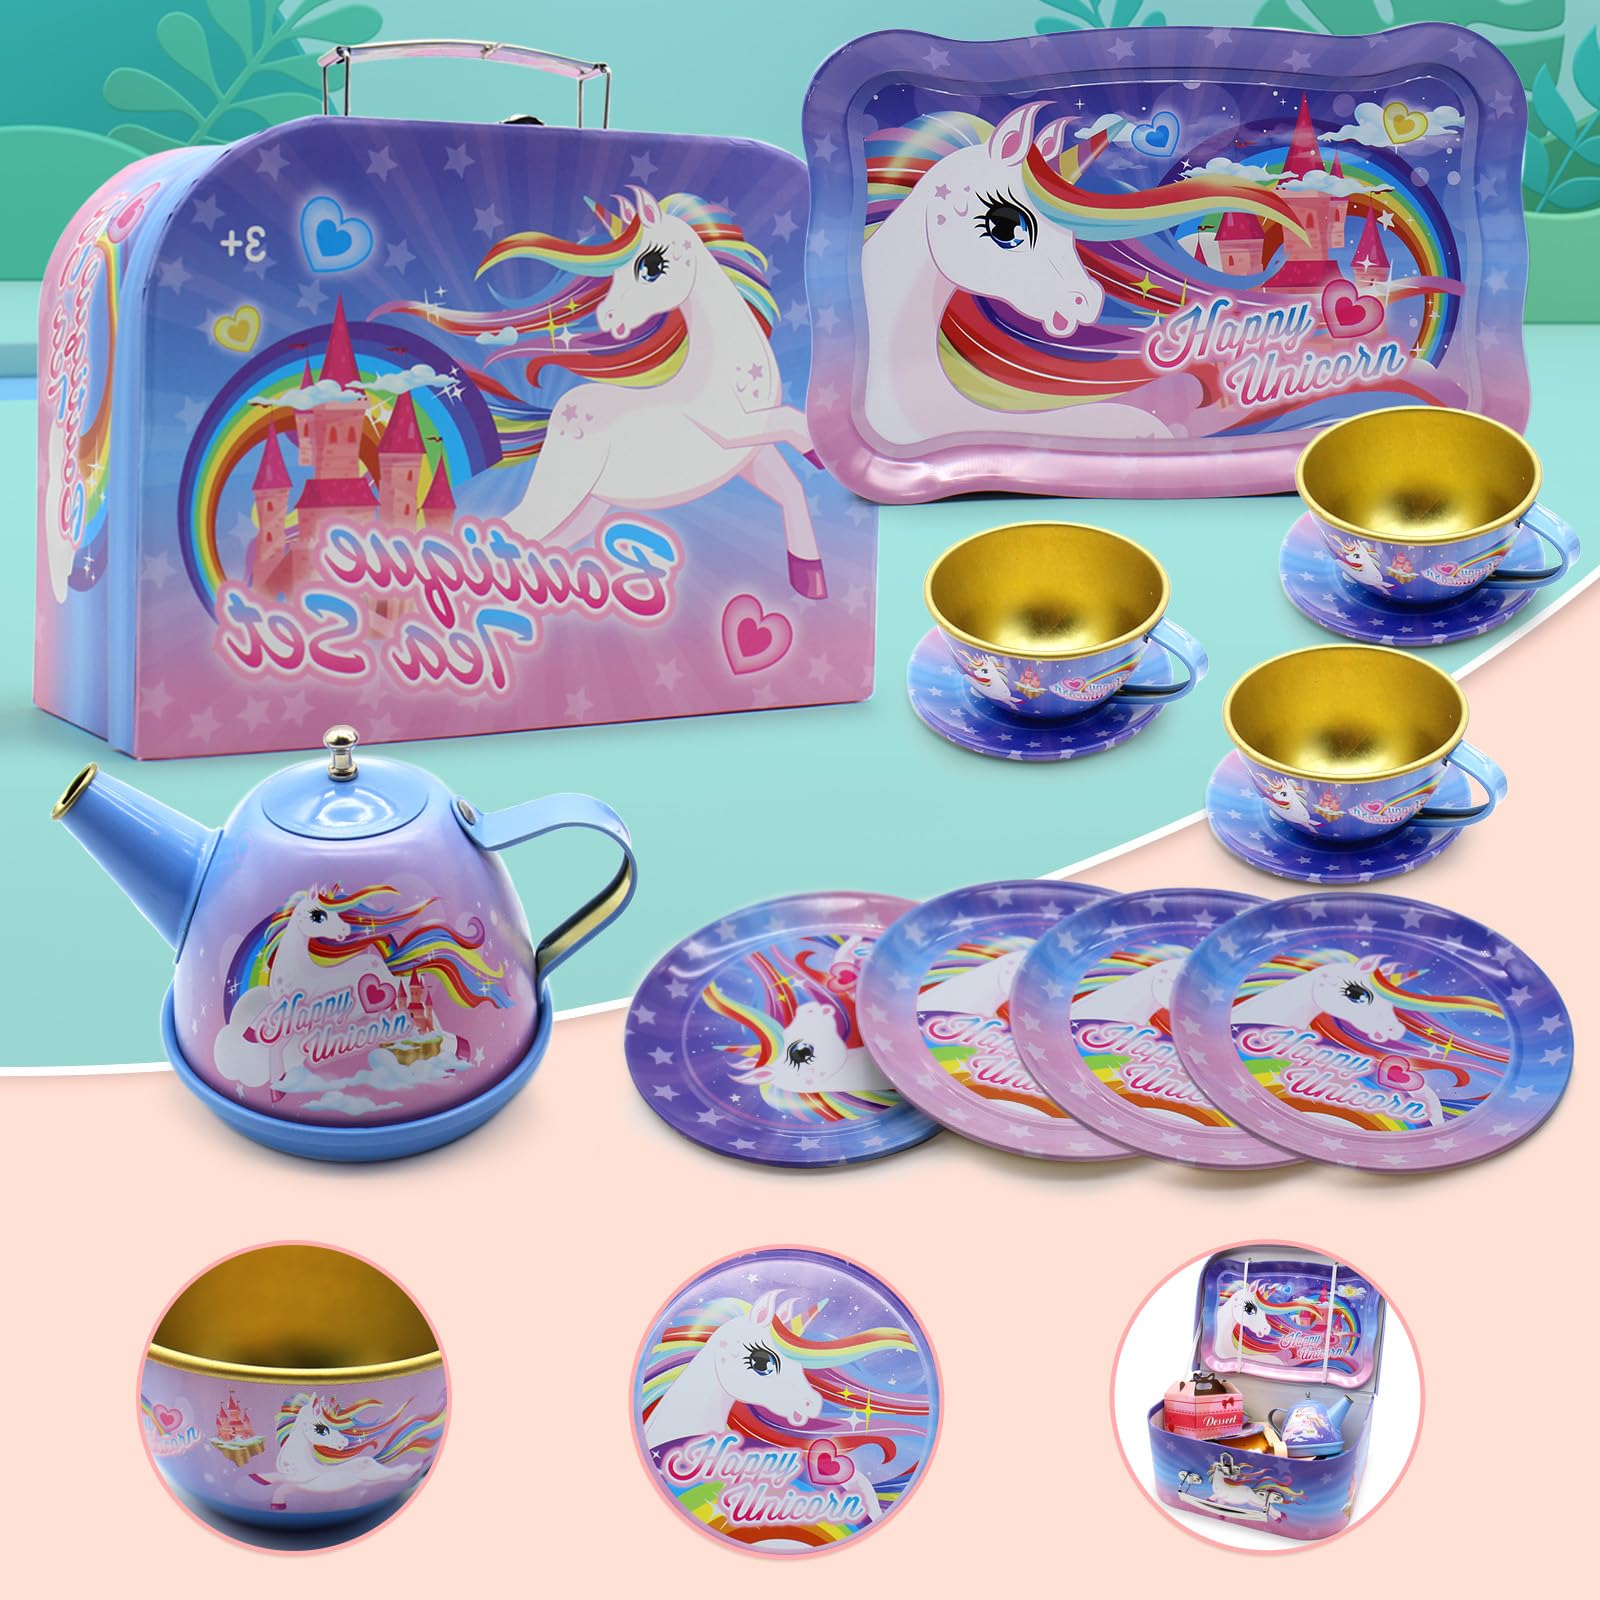 Dollox Kids Tea Party Playsets for Little Girls, Pretend Tin Teapot Set Princess Tea Time Toys Playset with Teapot, Cups, Plates and Carrying Case Birthday Gifts Ideas for Age 3 4 5 6 Years Old Girls